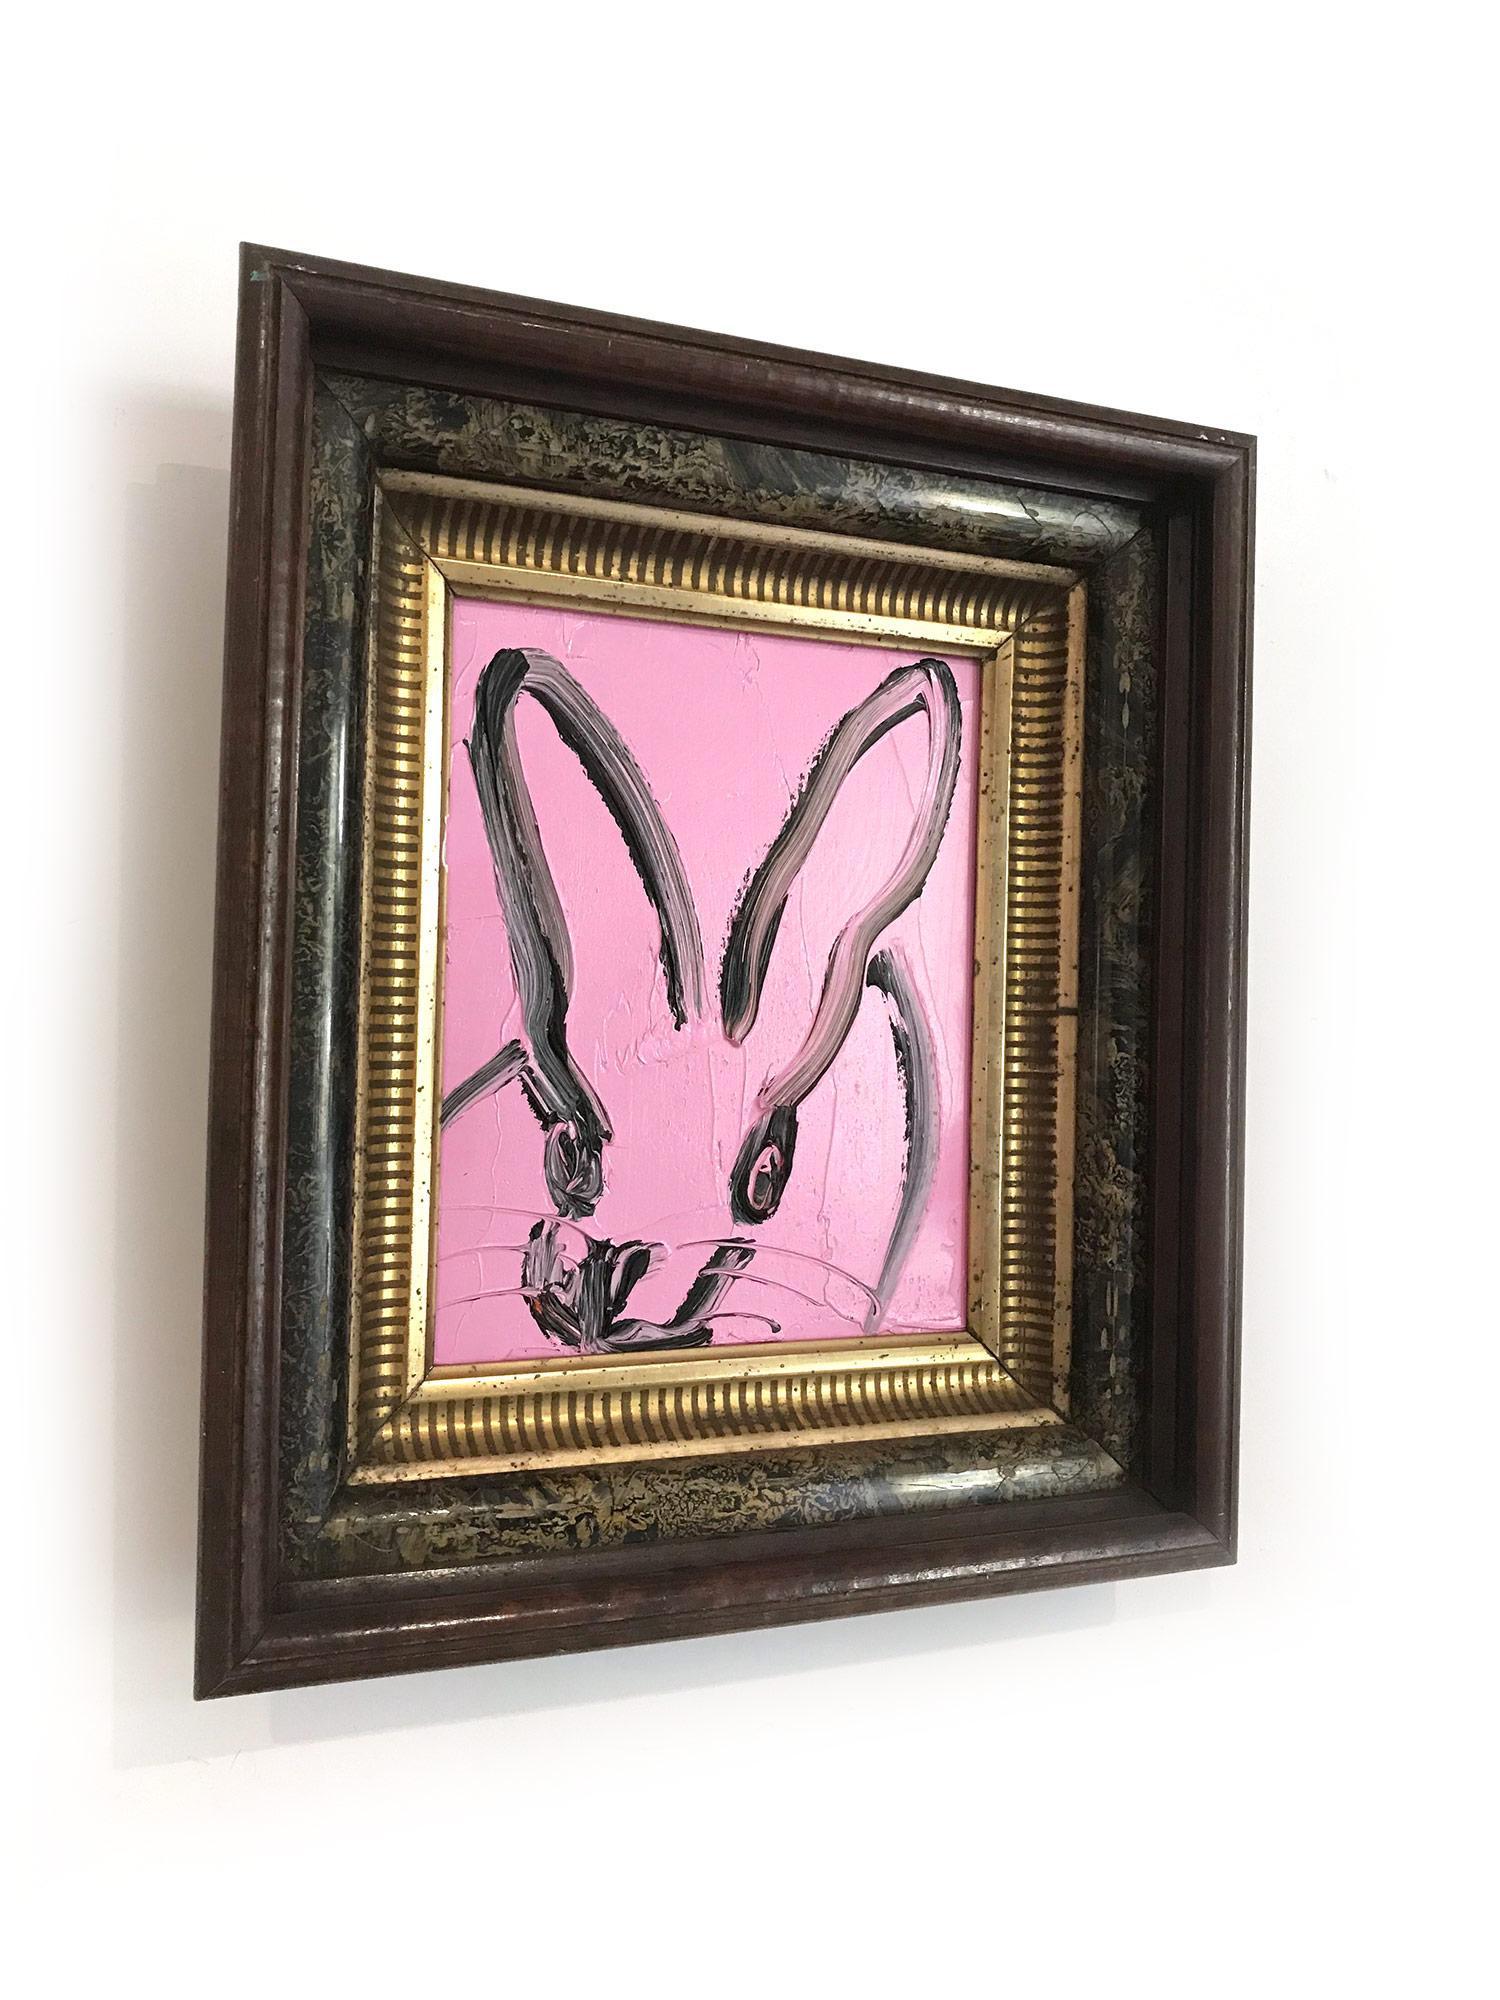 Untitled (Bunny on Pink Lavender) 7